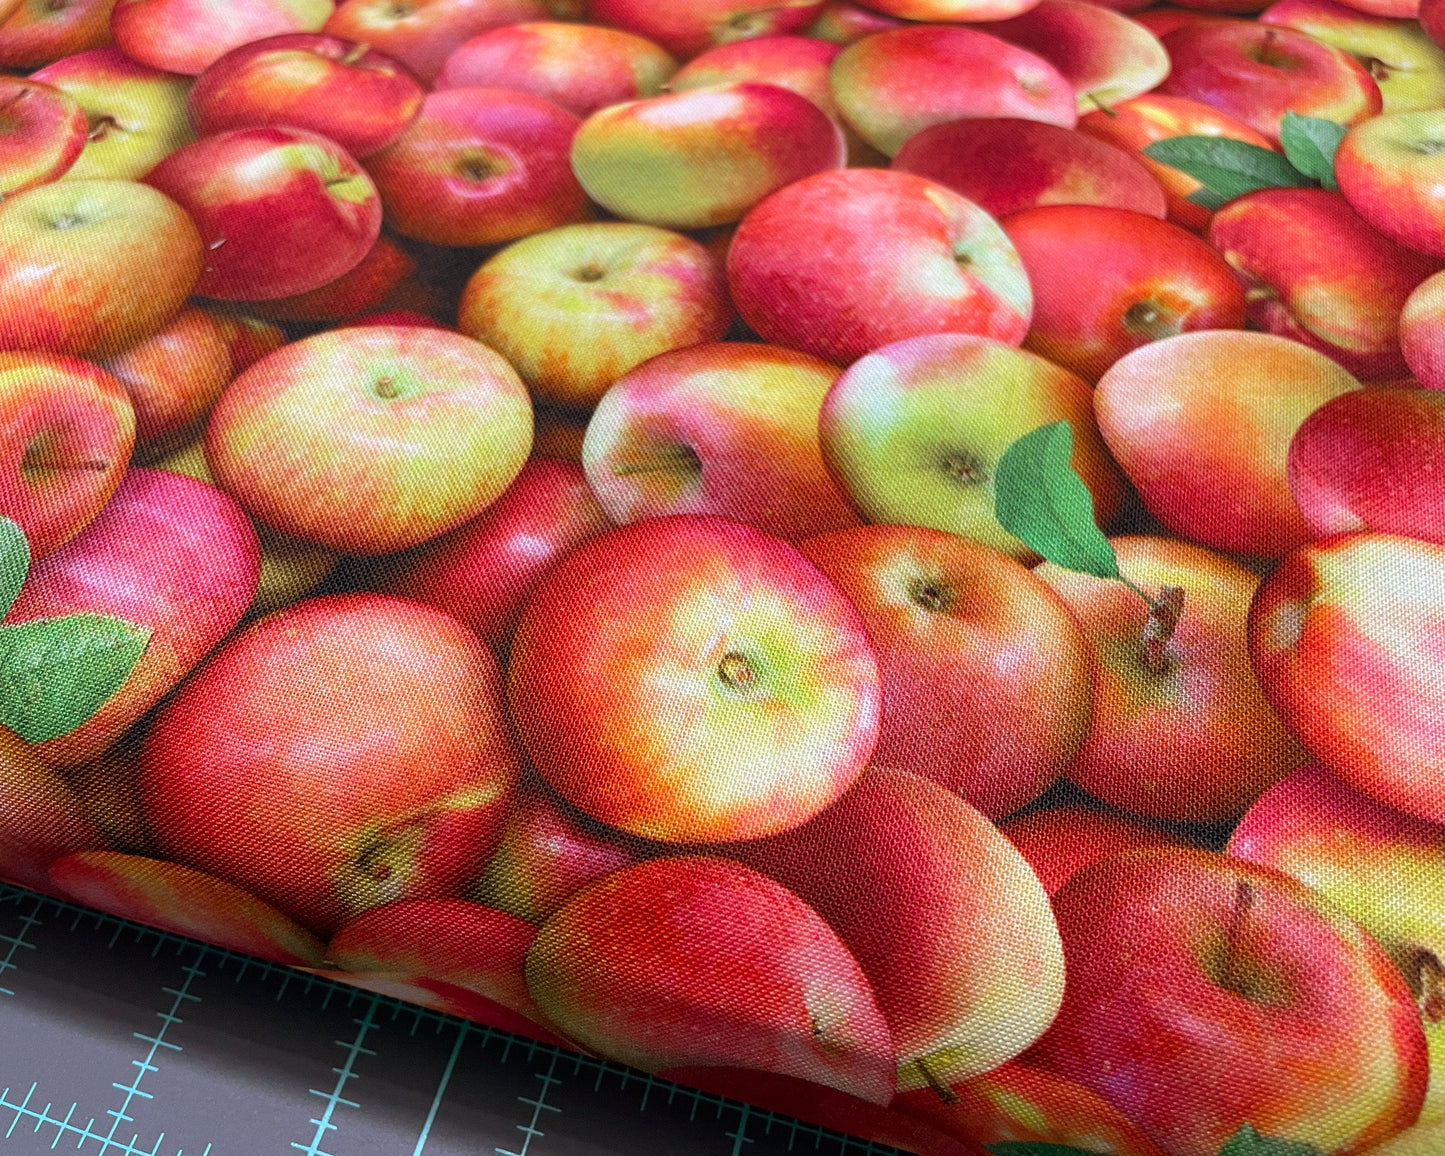 Apple Fabric - Food Festival collection by Elizabeth Studios - 100% Cotton Fabric - 641Multi Food theme Healthy Fruit Snack - Ships NEXT DAY